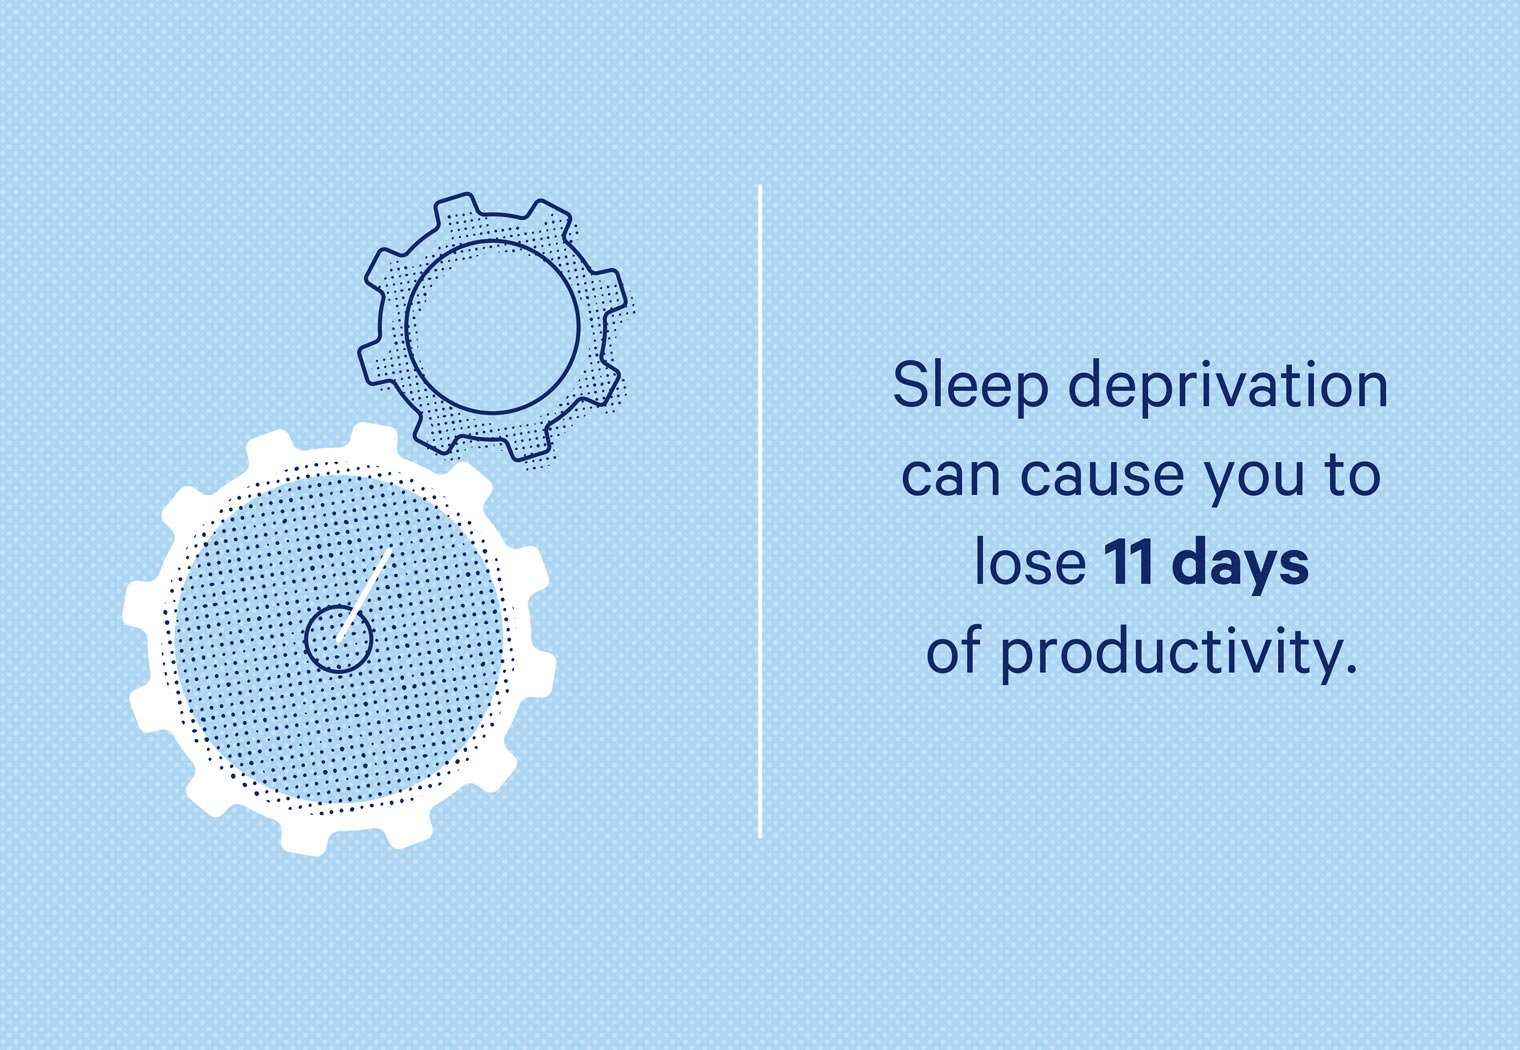 You can lose up to 11 days of productivity if you’re sleep deprived.